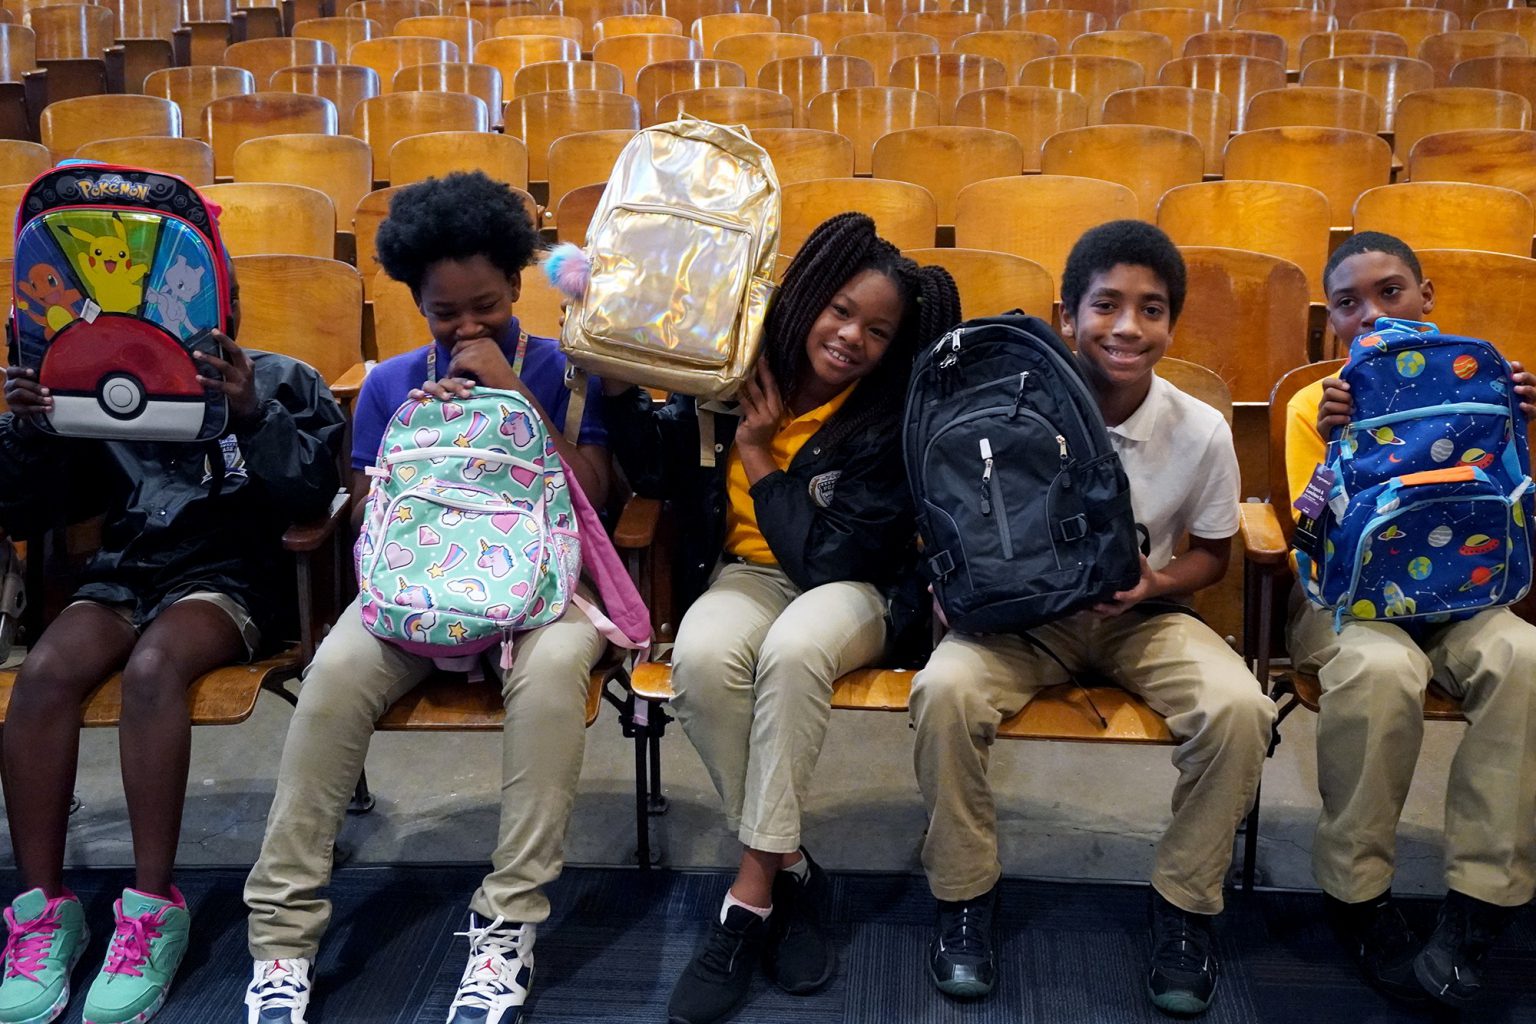 Engineering firm donates 30 backpacks to Southern Dallas school